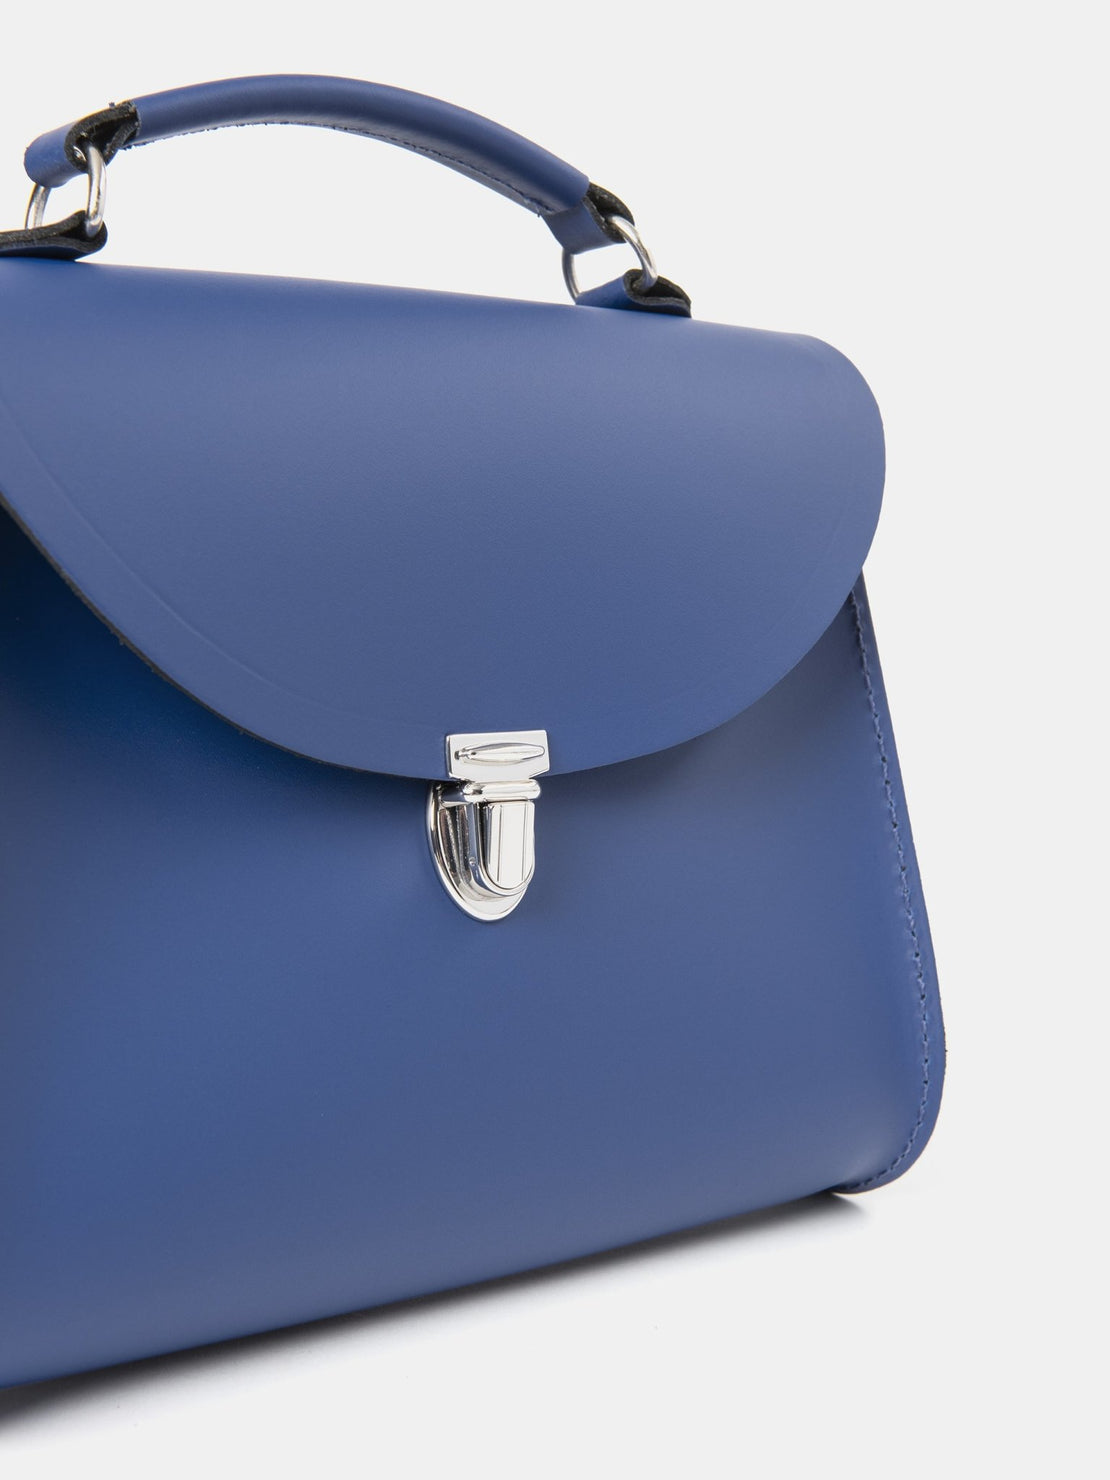 The Poppy Backpack - Sultry Matte - The Cambridge Satchel Company UK Store